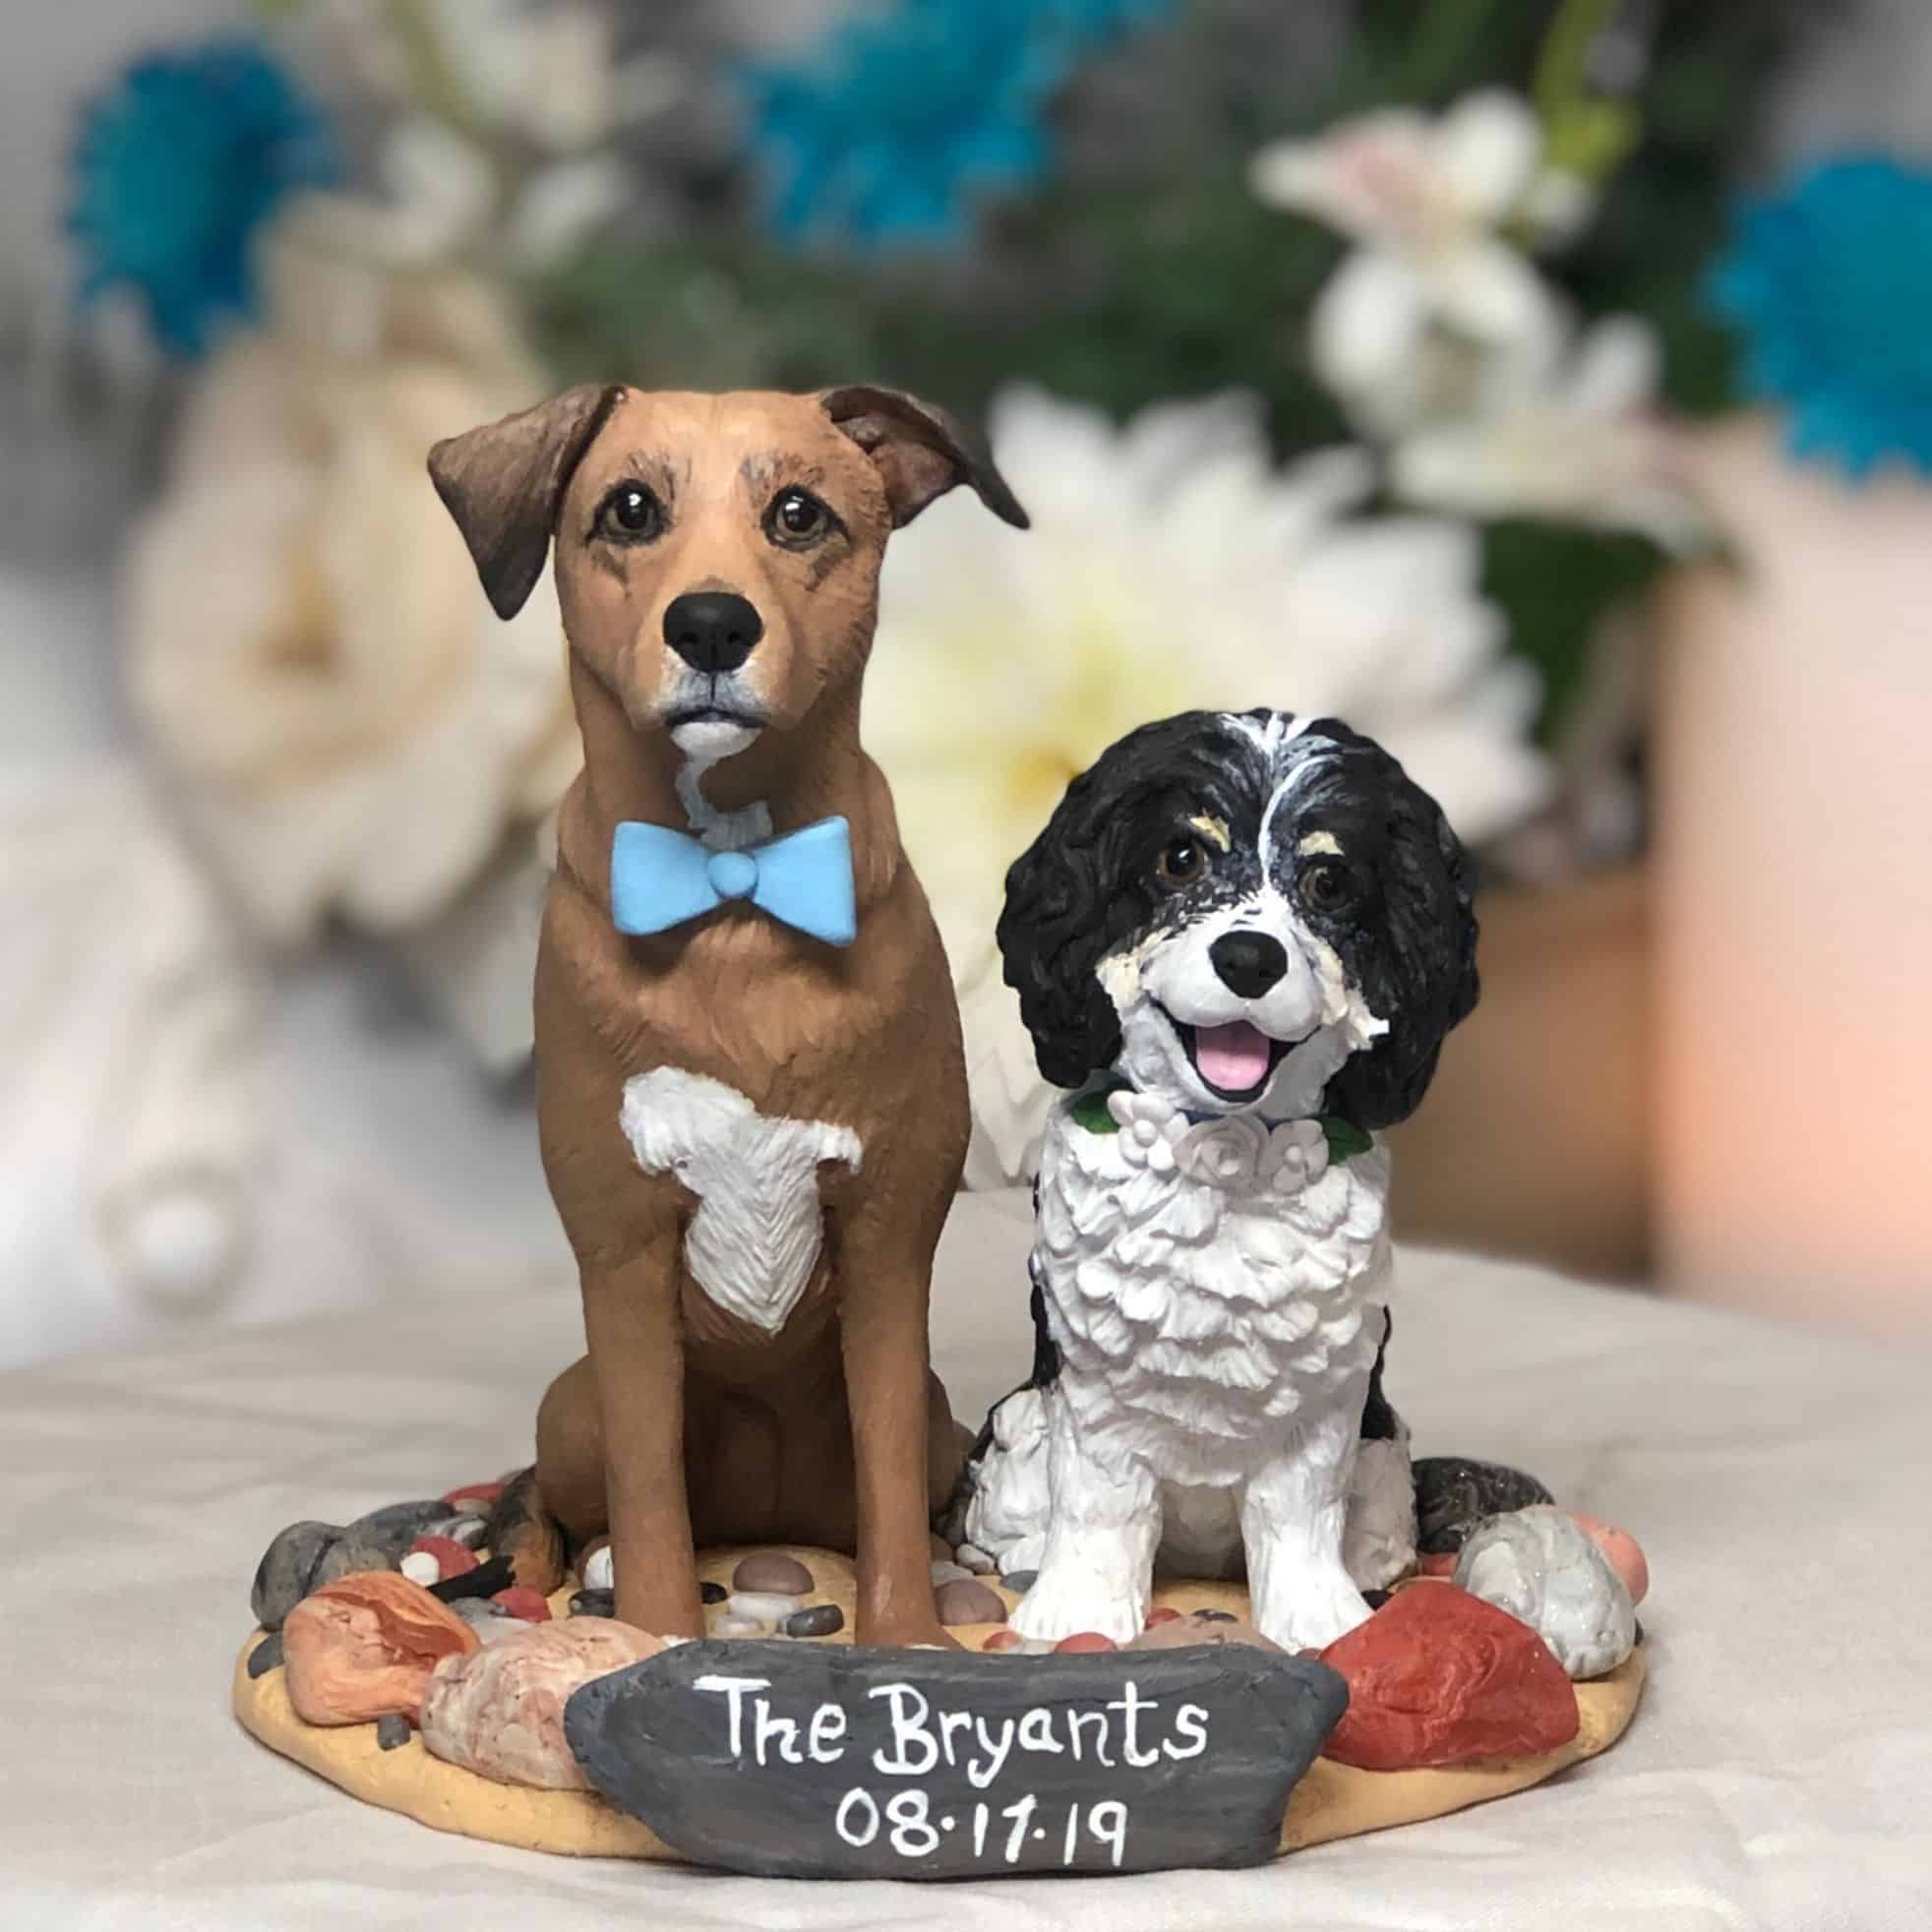 Pin on Custom Pet Wedding Cake Toppers Dogs Cats Animals